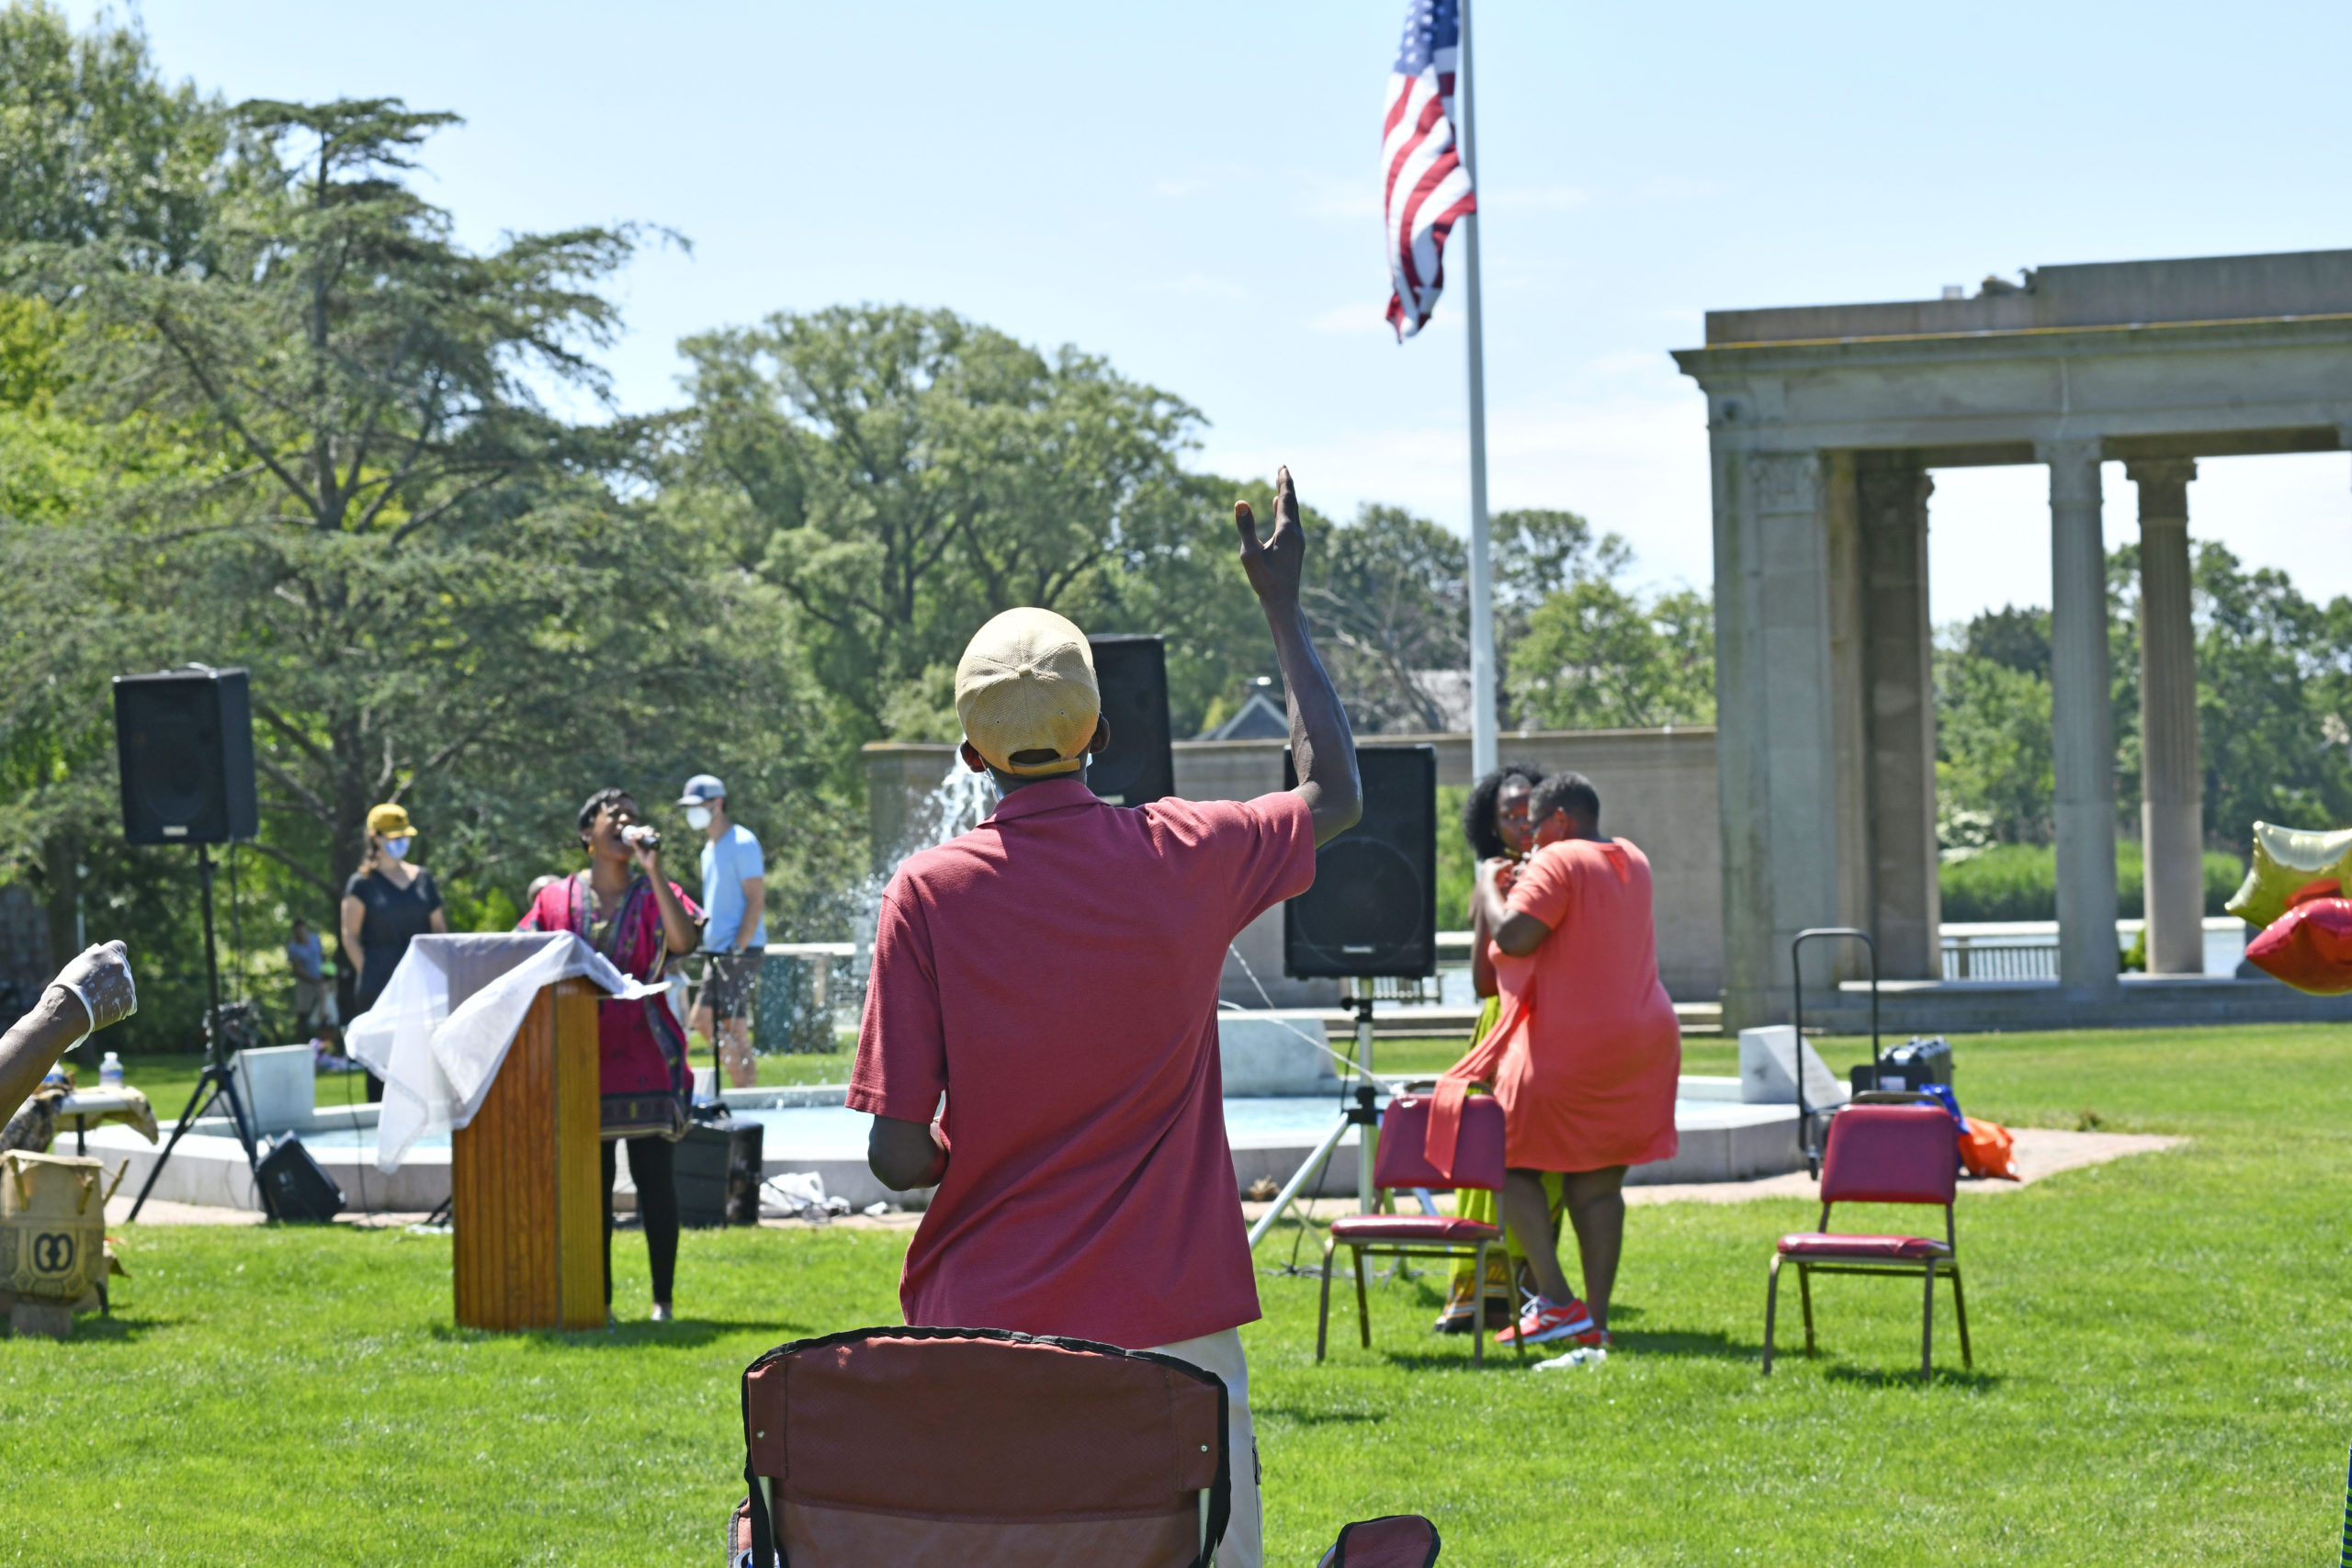 A Juneteeth celebration was held in Agawam Park on Friday with speakers, music and food. Originating in Texas, Juneteenth is now celebrated annually on the 19th of June and commemorates Union army general Gordon Granger announcing federal orders in Galveston on June 19, 1865, stating that all slaves in Texas were free. DANA SHAW